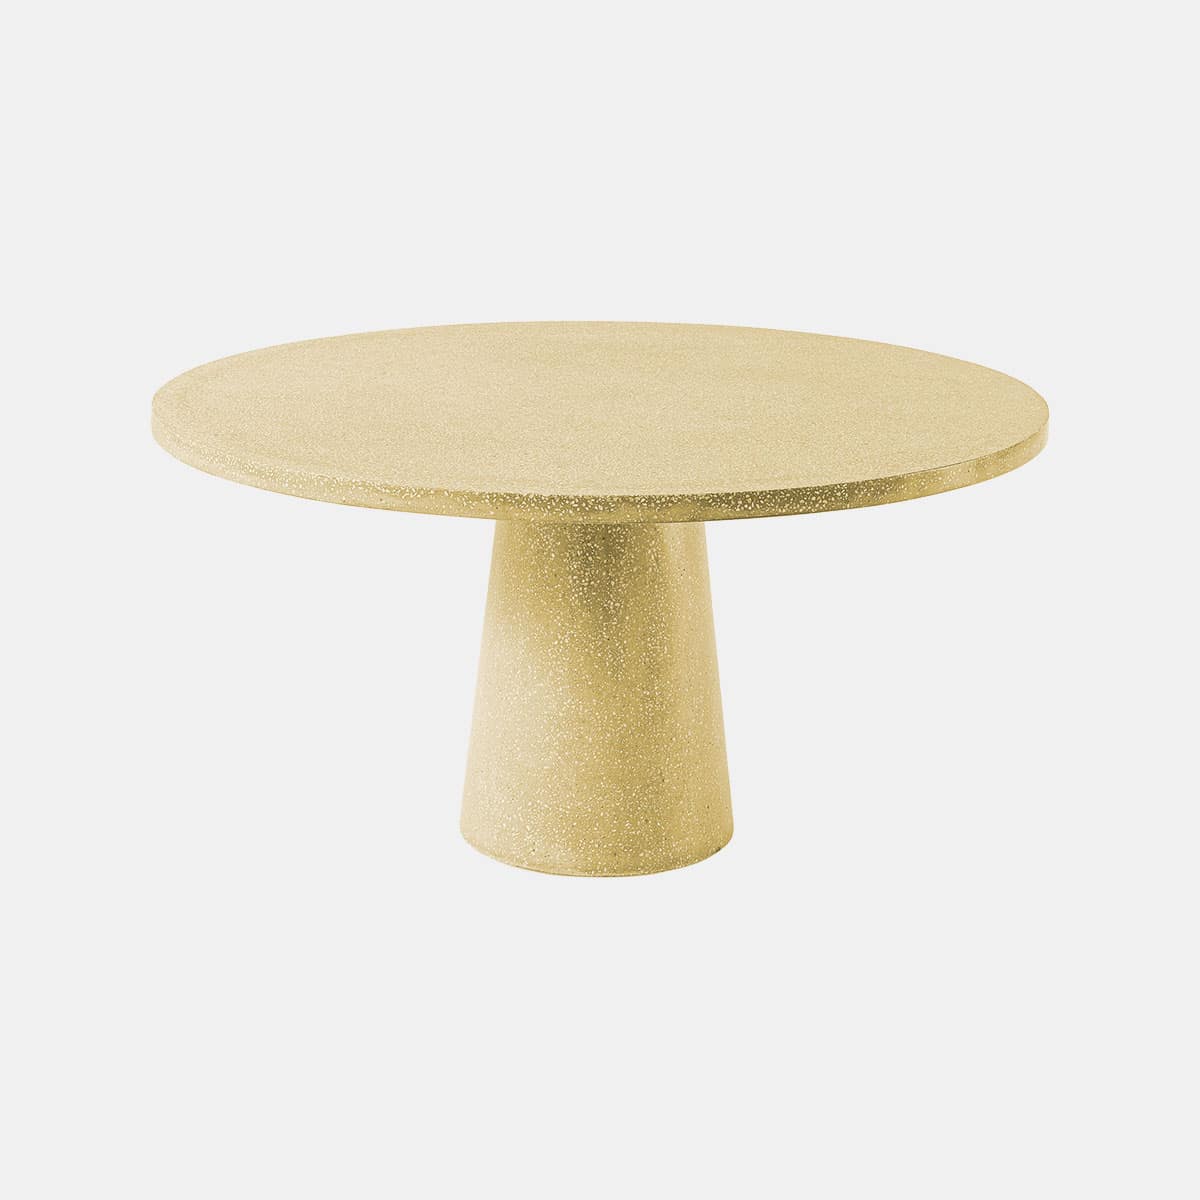 cassina-rodolfo-dordoni-dine-out-dining-table-round-140x66-terrazzo-geel-wit-001shop